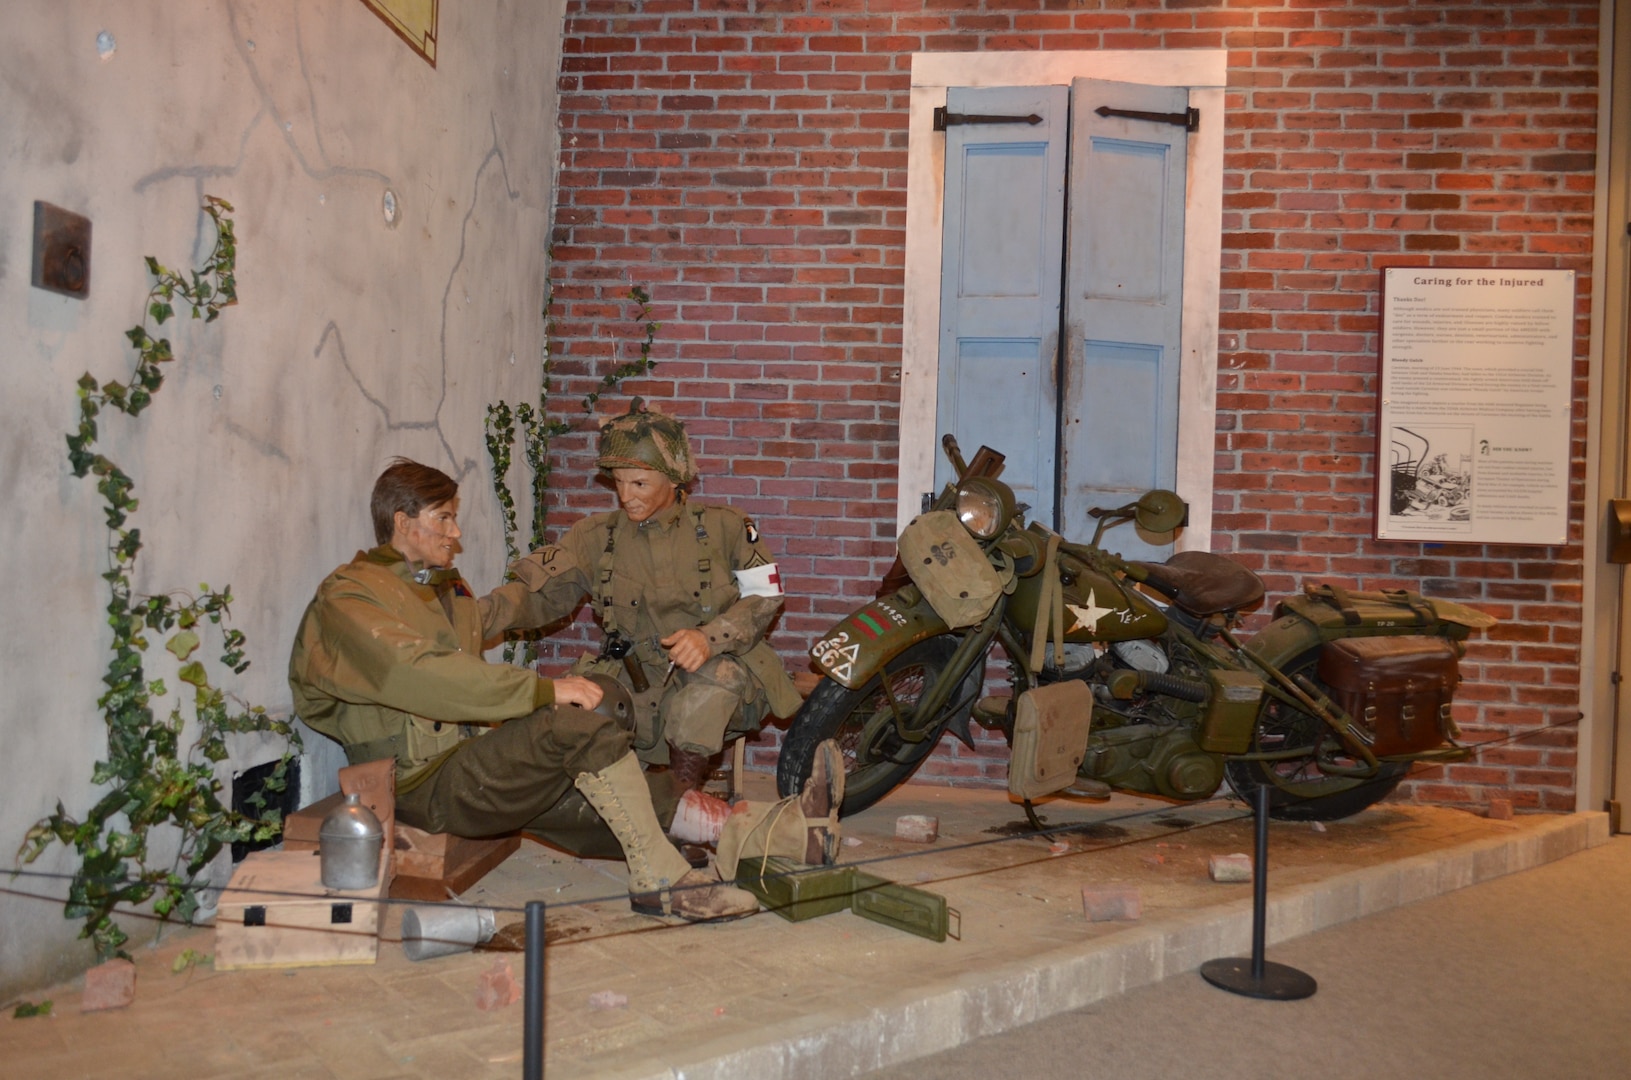 This scene depicting a medic treating a wounded dispatch rider in a French town after the D-Day invasion in 1944 is one of two new diorama displays at the U.S. Army Medical Department Museum at Joint Base San Antonio-Fort Sam Houston